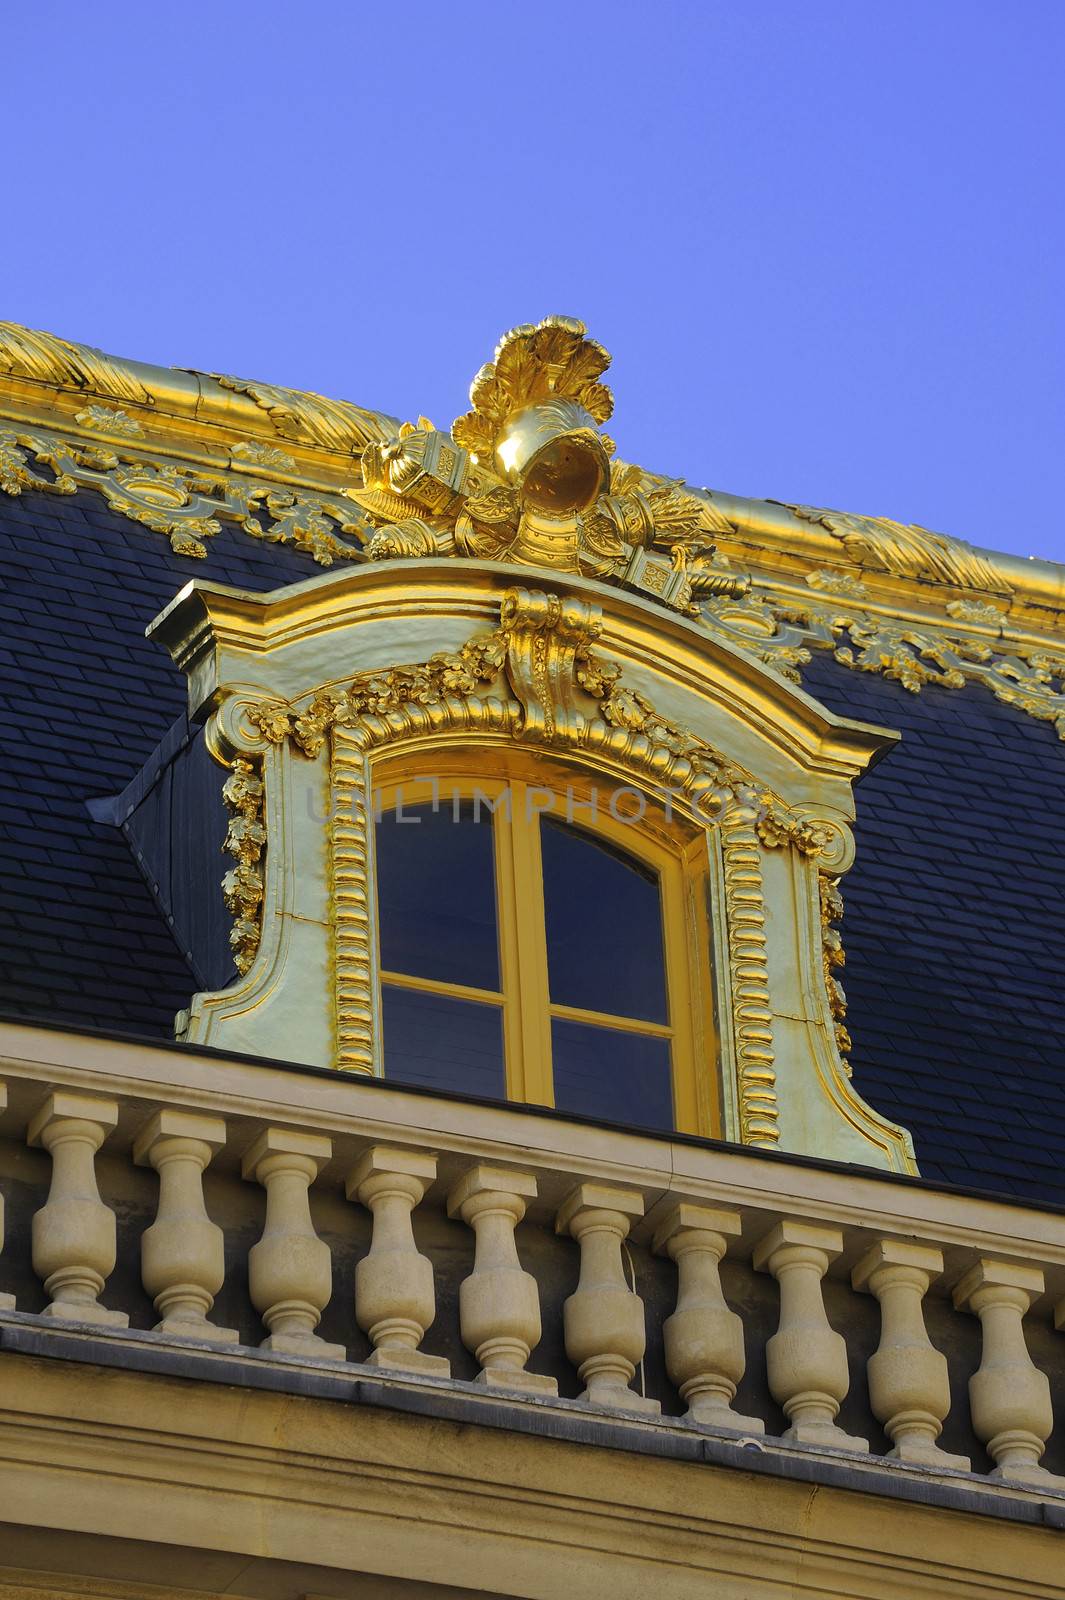 Castle of Versailles, architectural detail and gilding of the facade and roof